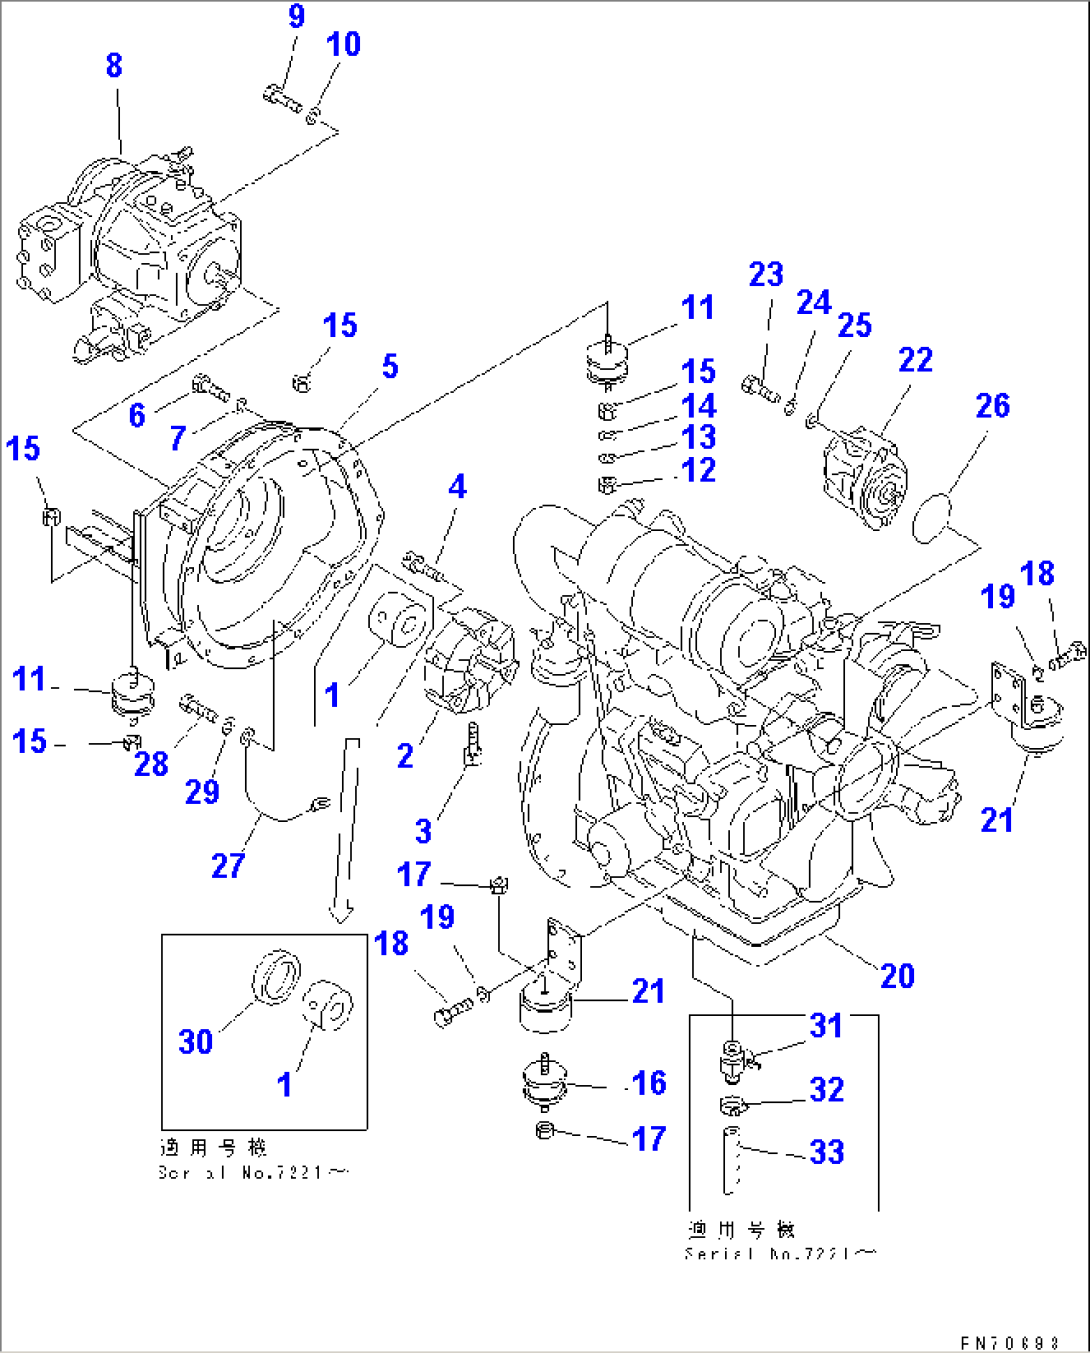 ENGINE AND PUMP MOUNTING PARTS